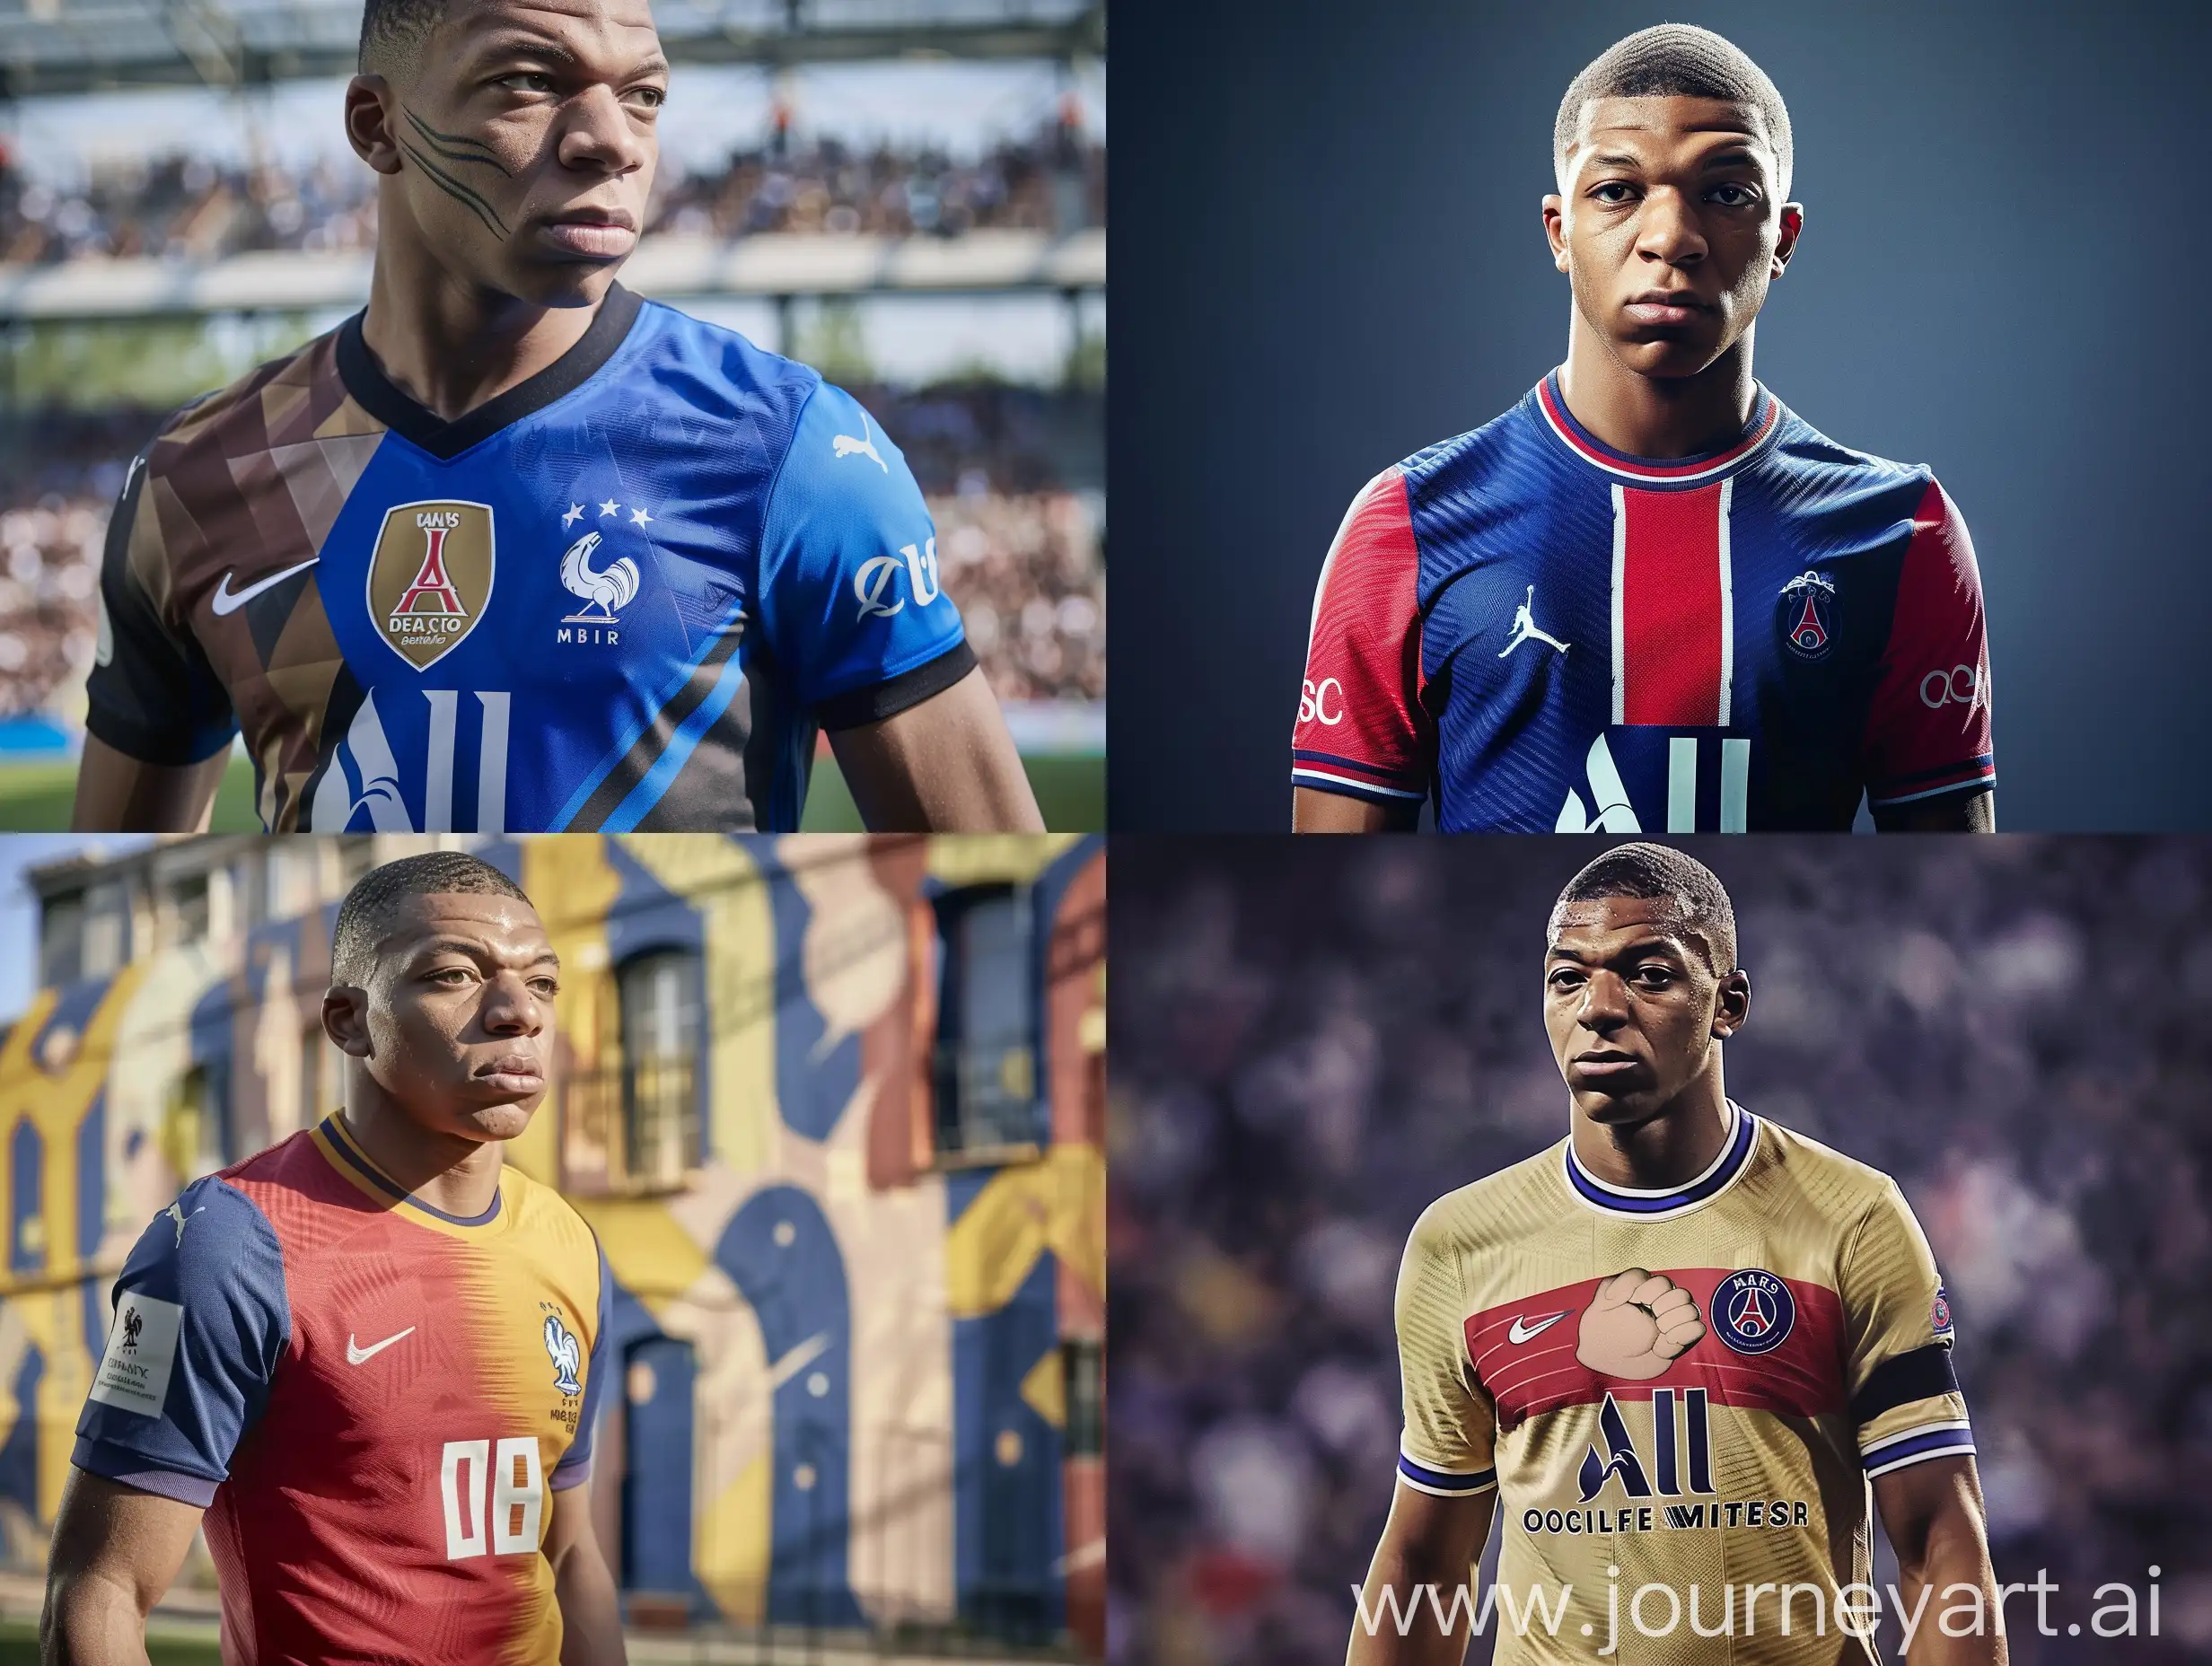 Kylian-Mbappe-Football-Jersey-Resembling-Obelix-Athletic-French-Soccer-Player-in-Unique-Attire